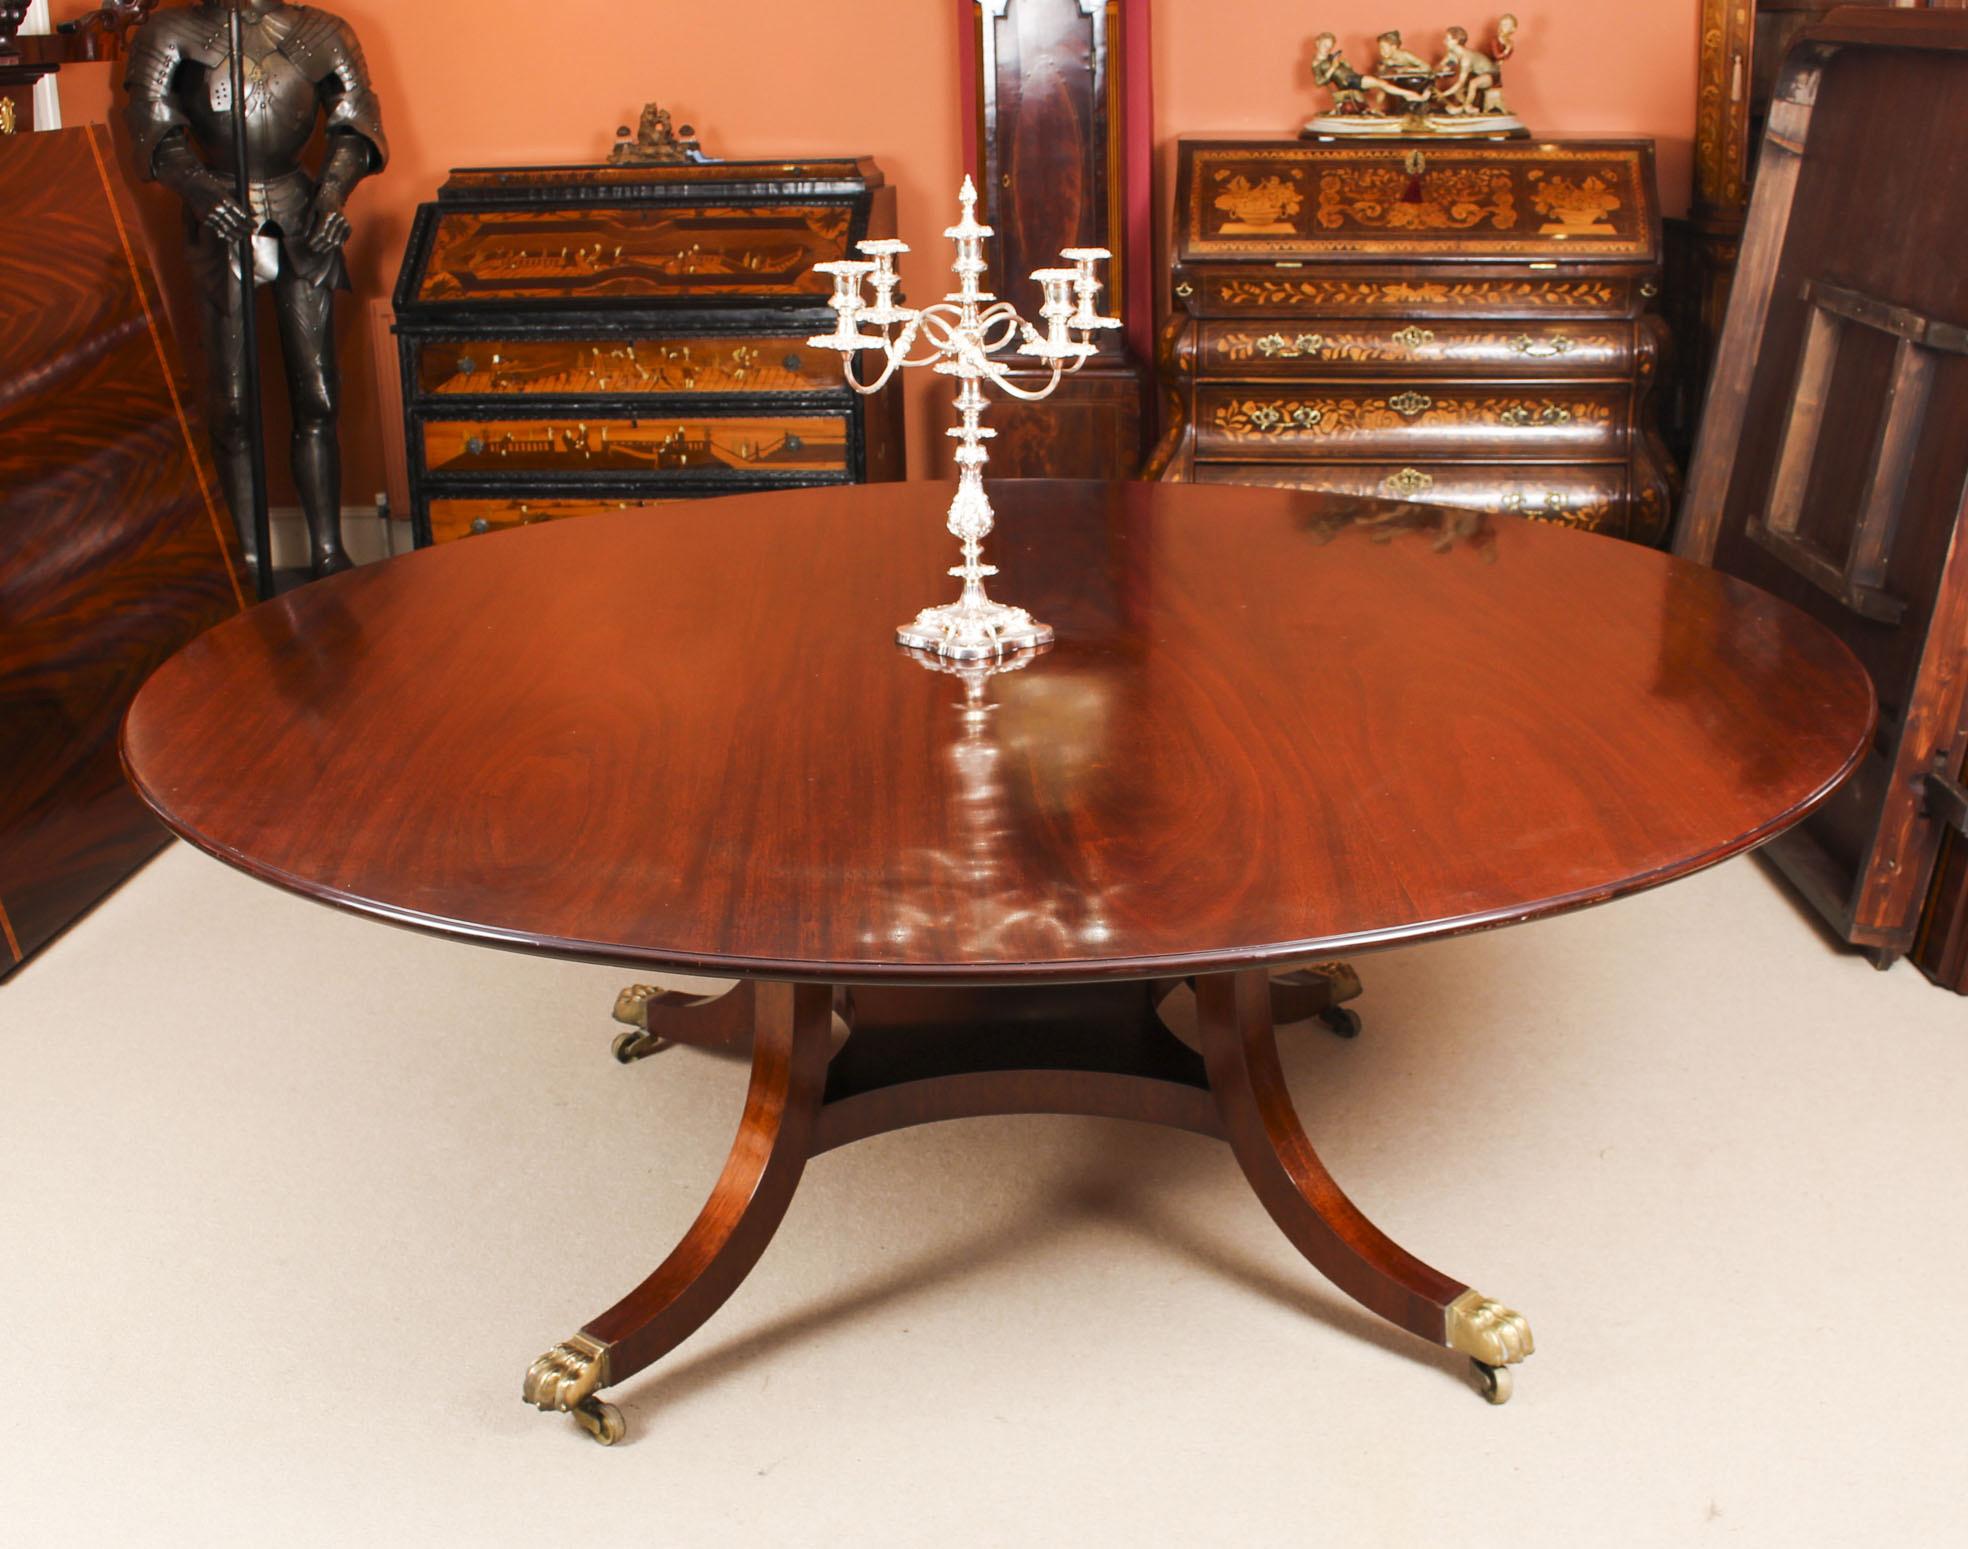 This beautiful Regency Revival flame mahogany dining table was made by the Master Cabinet maker William Tillman and bears his label on the underside, it can seat eight people in comfort and is Circa 1970 in date.

The fabulous 6ft 6 inch diameter